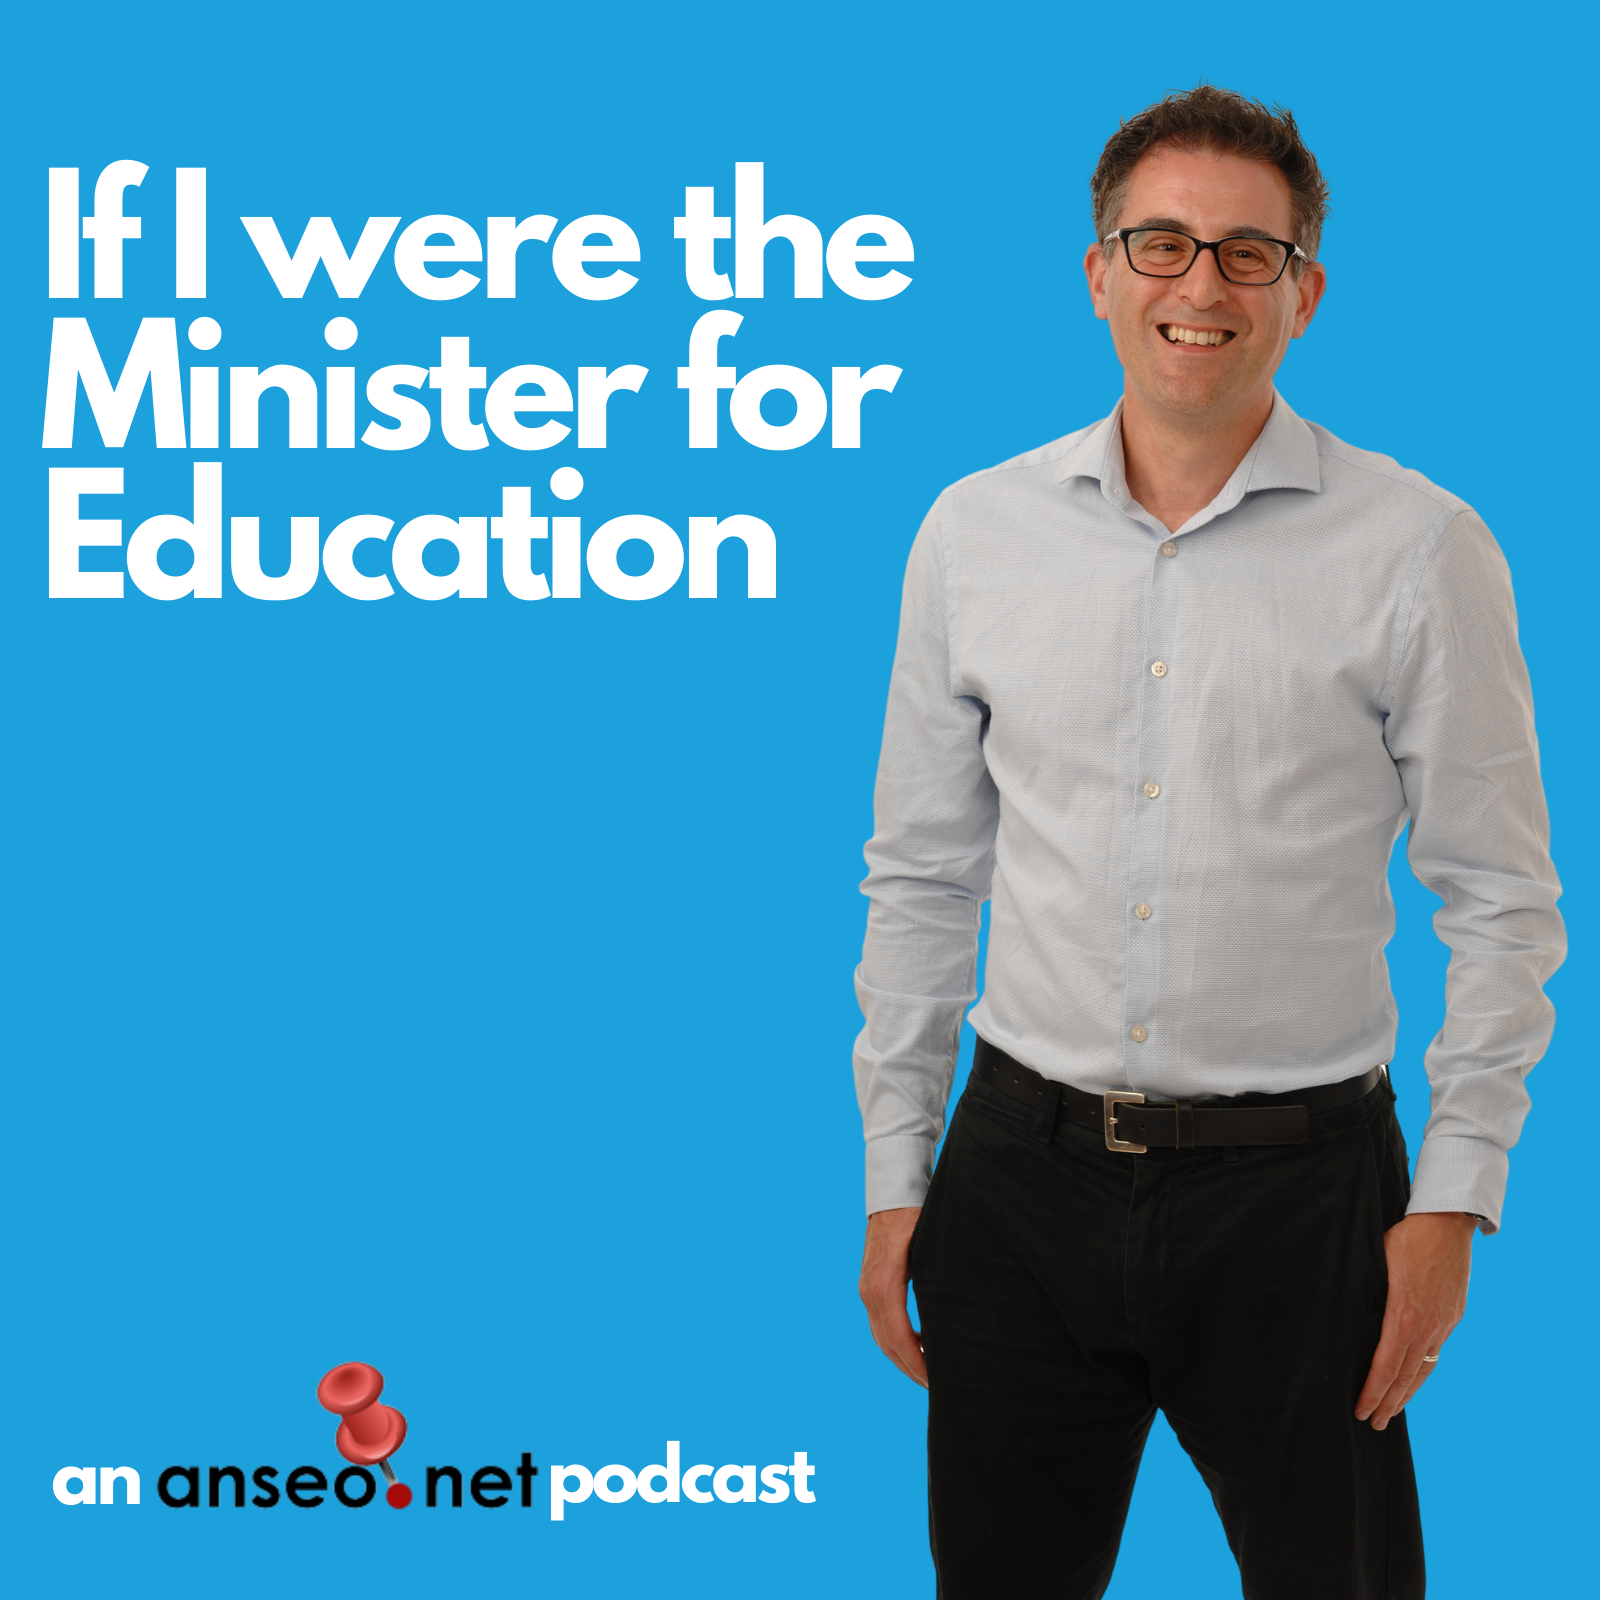 Artwork for Anseo.net - If I were the Minister for Education